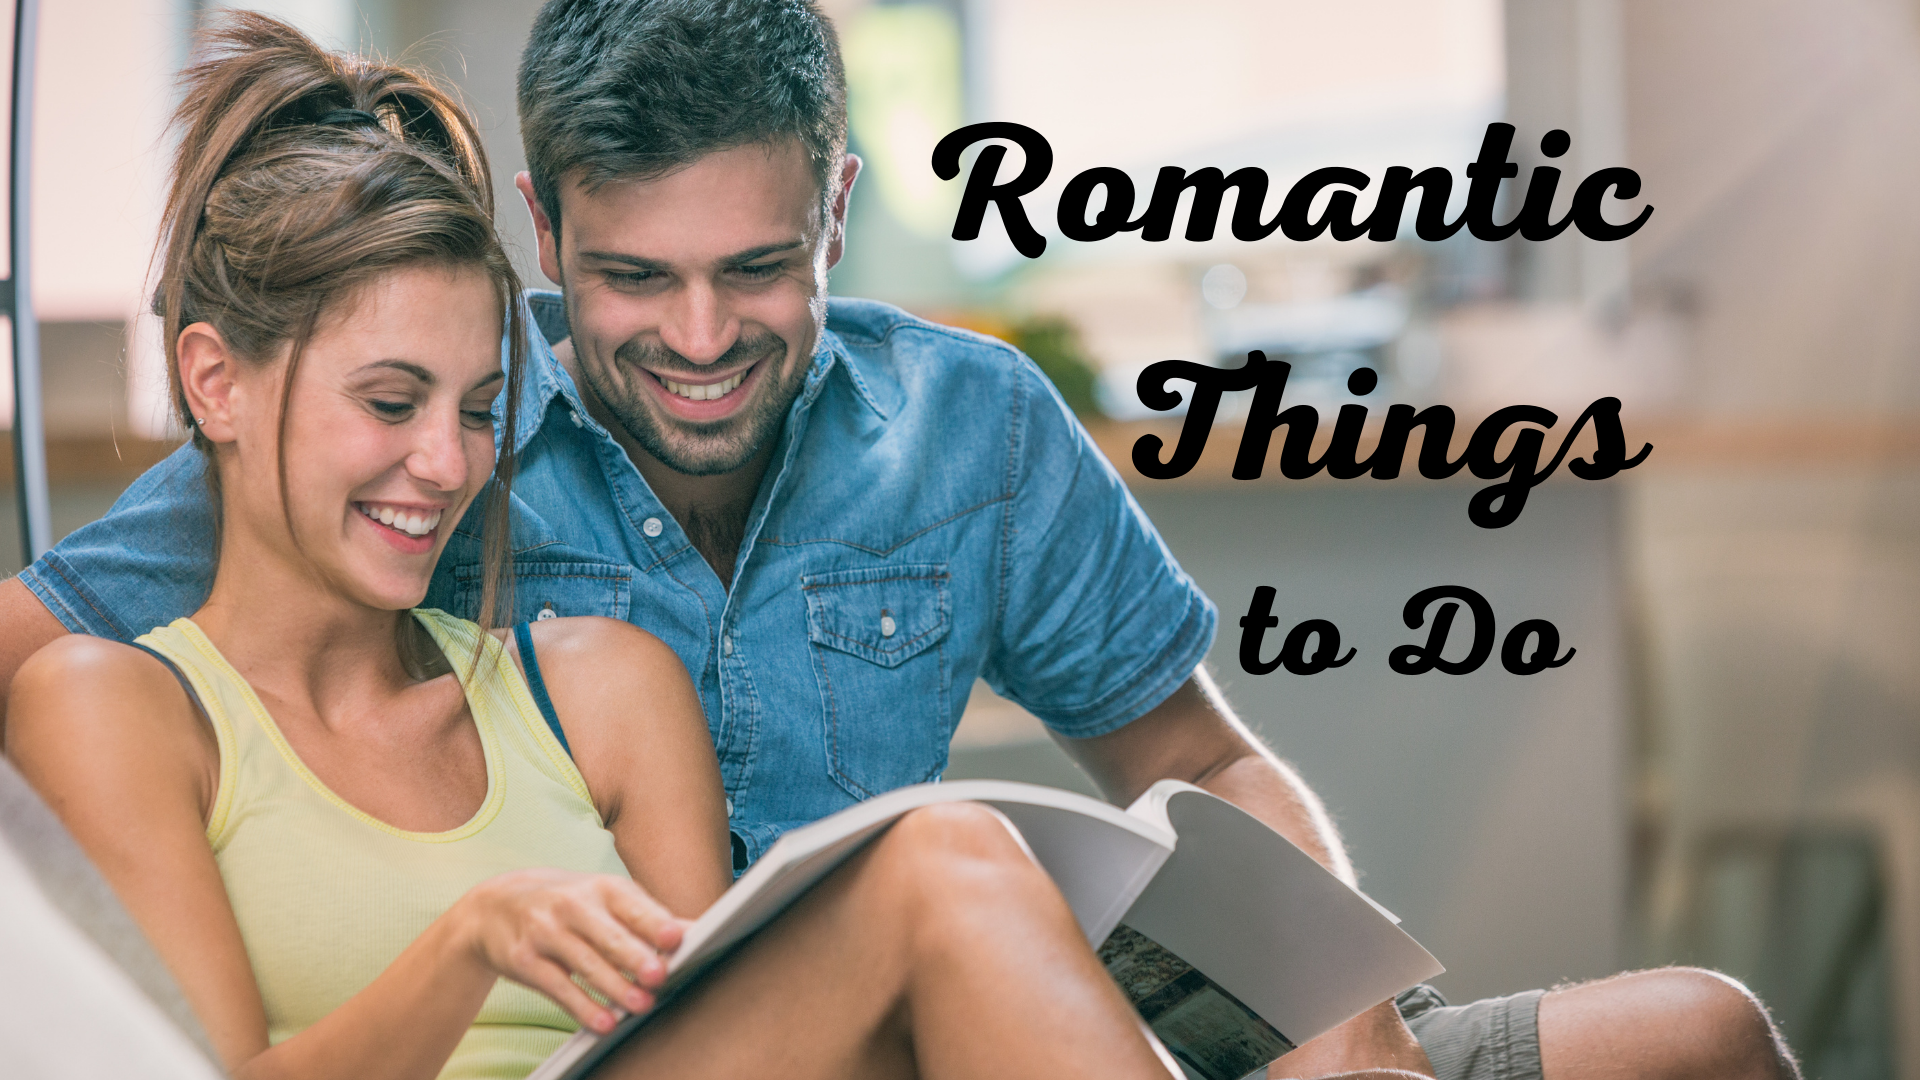 Romantic Things to Do - Stock Adobe - Canva